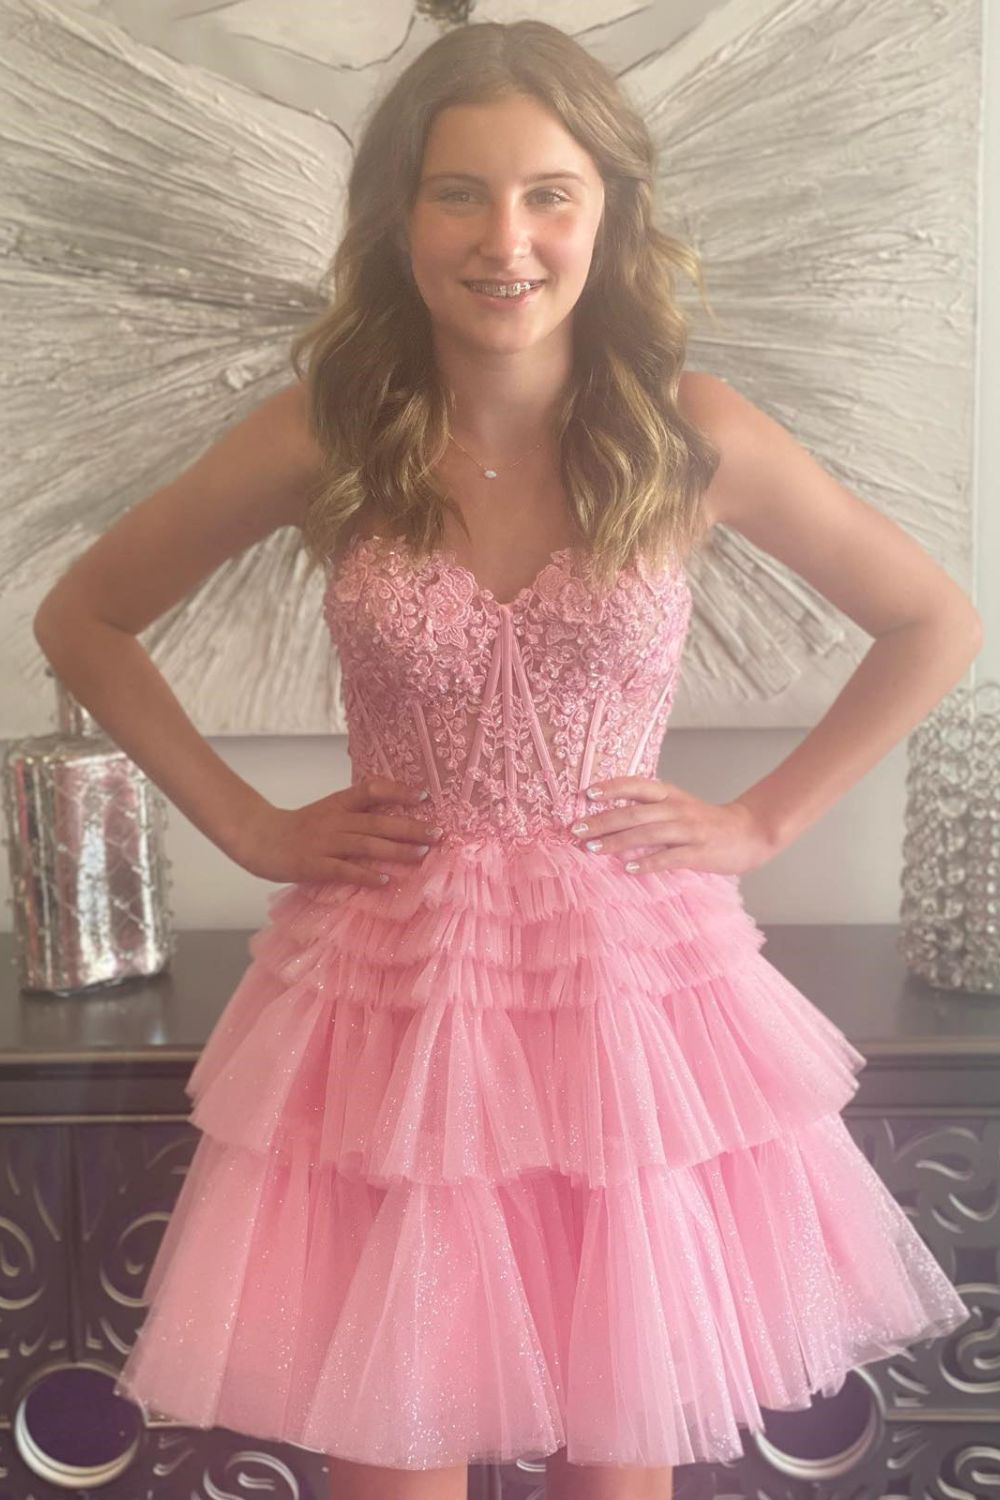 dressimeCute A Line Tiered Sweetheart Tulle Short Homecoming Dresses with Ruffles 